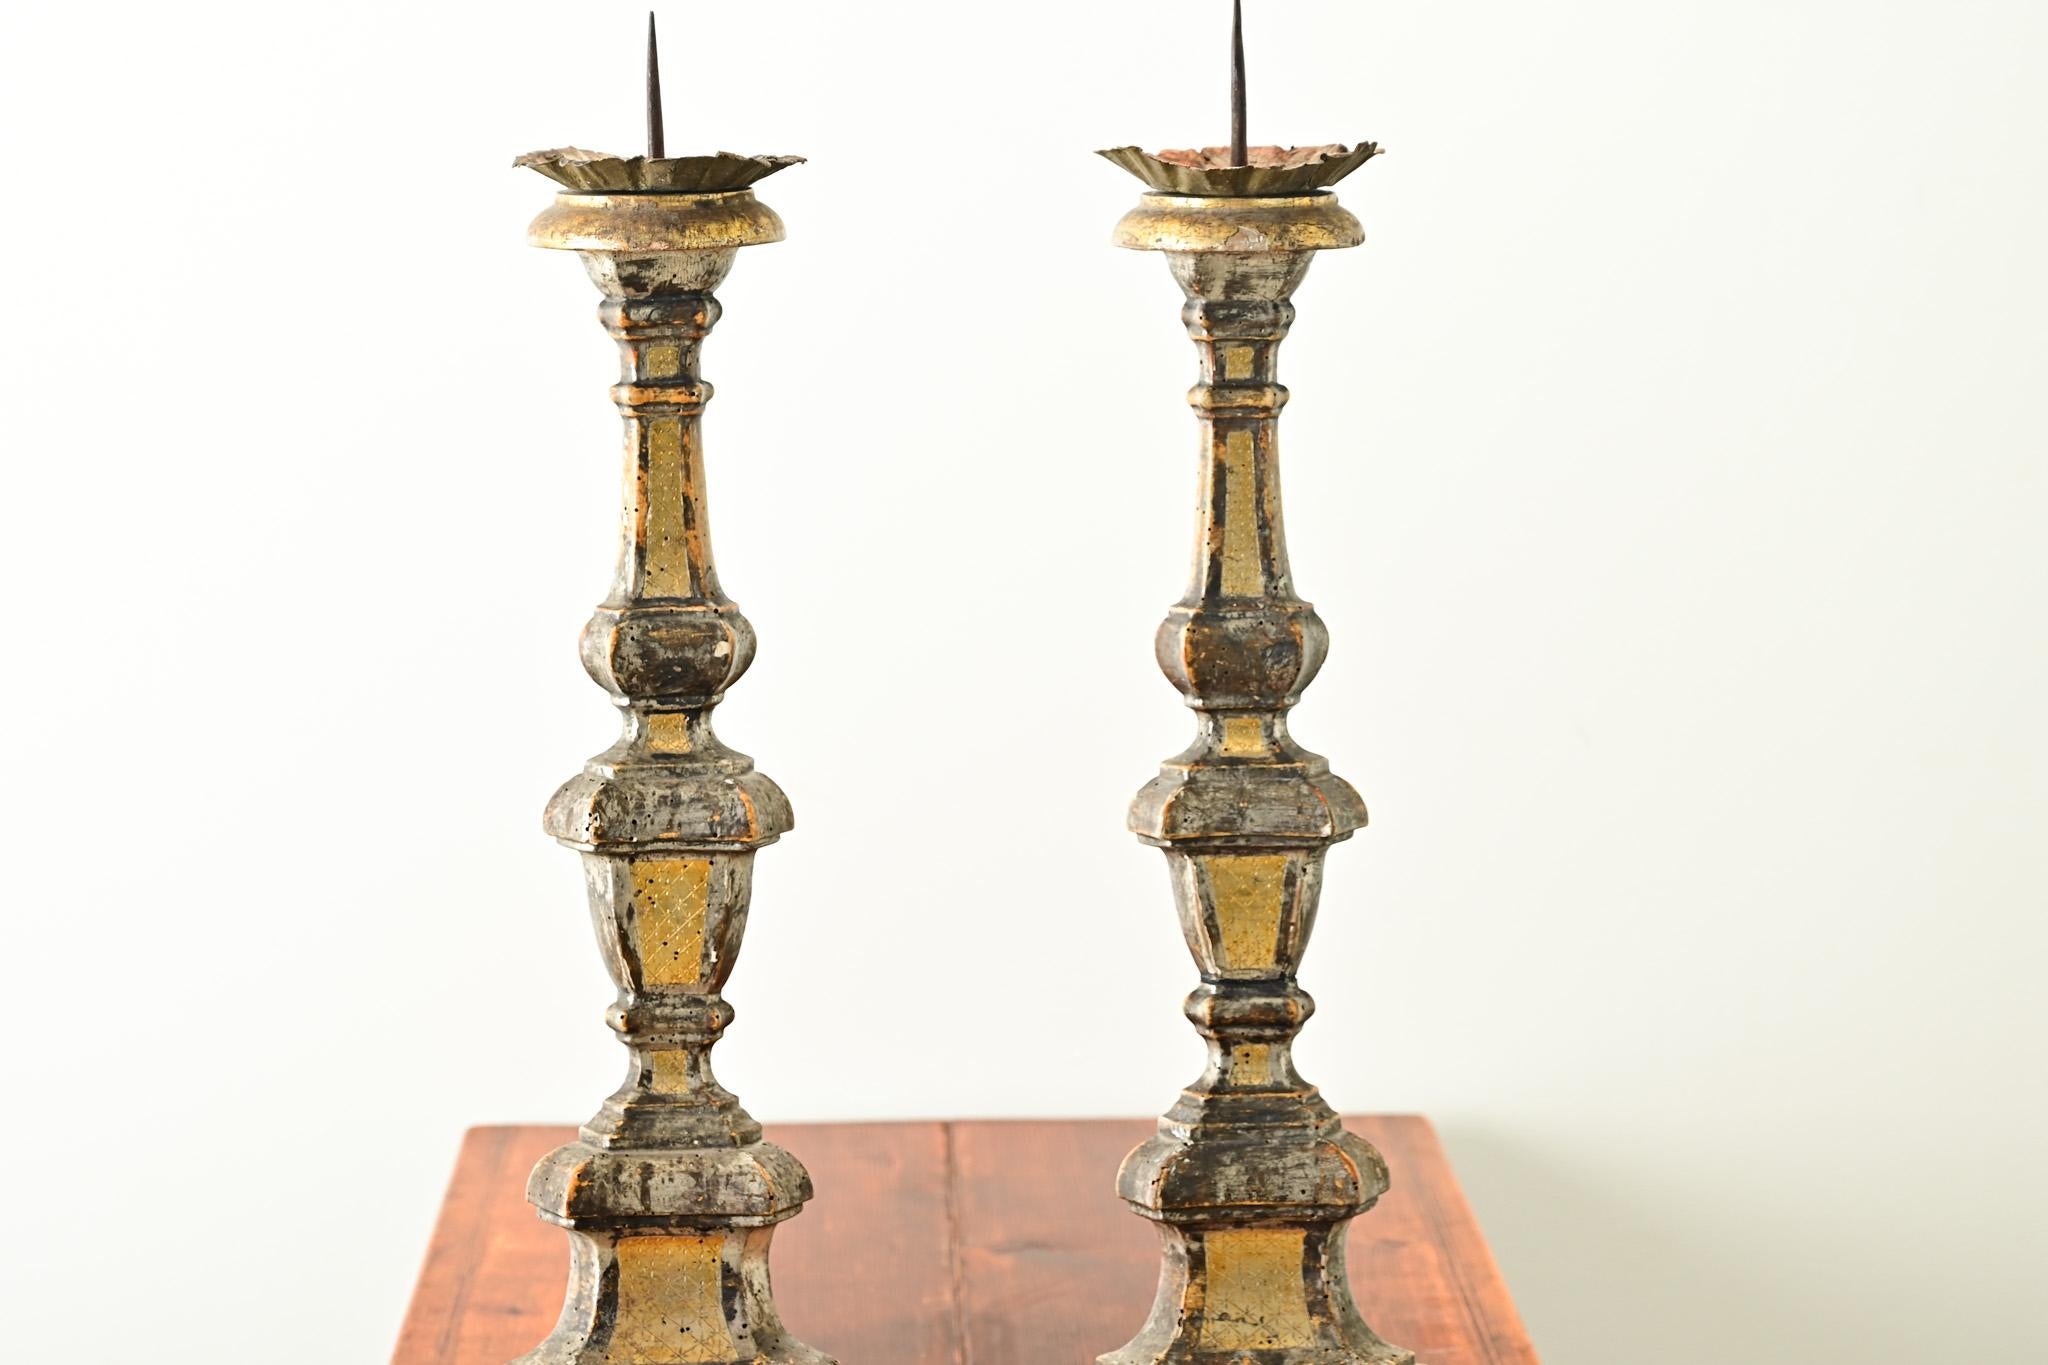 Other Pair of 16th Century Italian Gilt Candlesticks For Sale